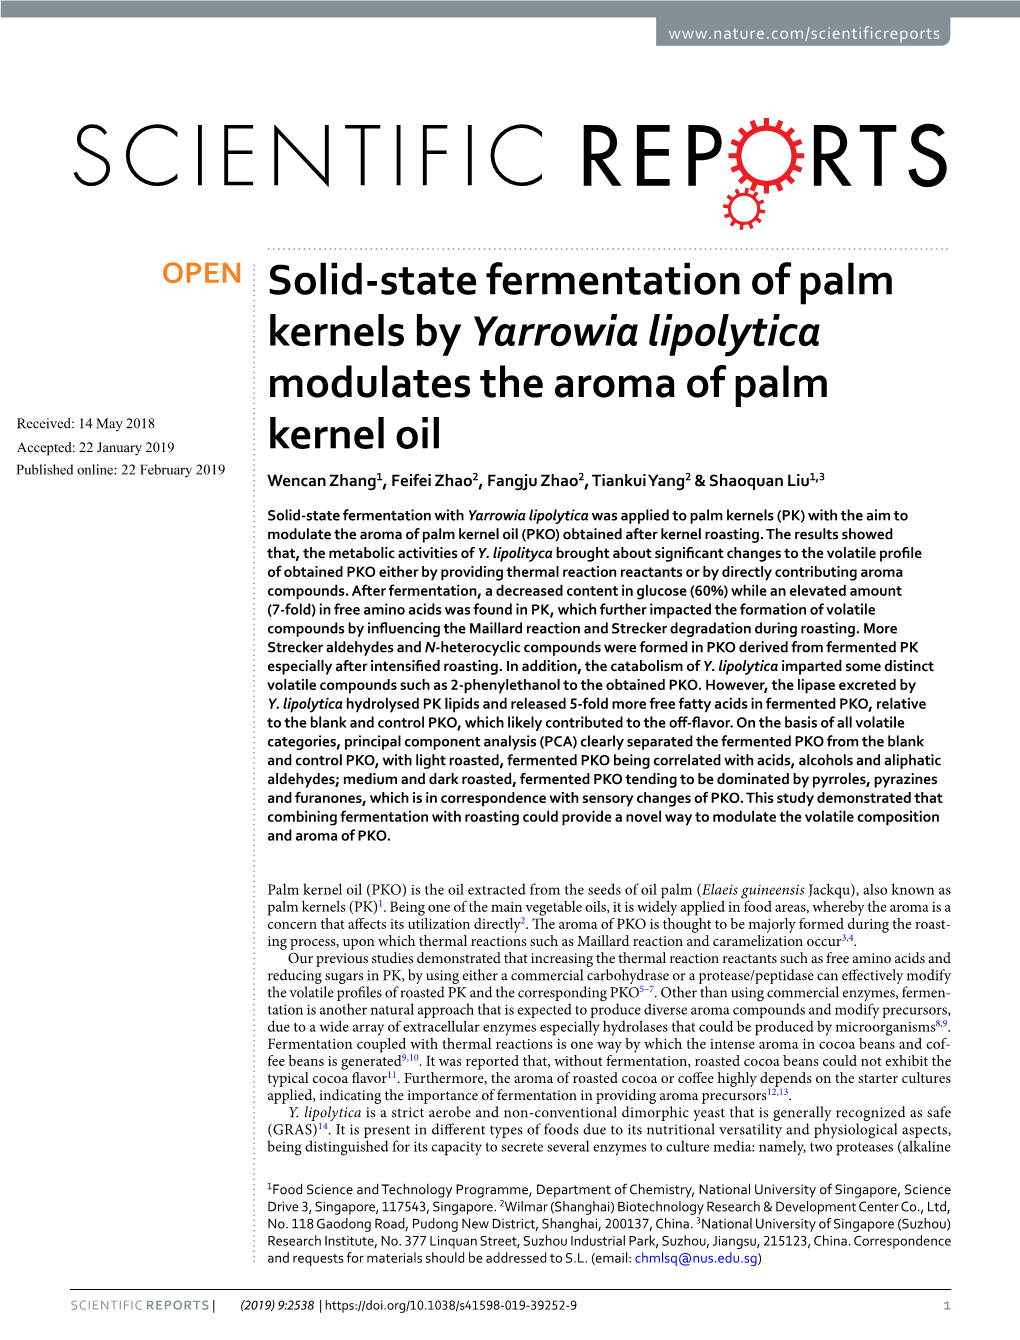 Solid-State Fermentation of Palm Kernels by Yarrowia Lipolytica Modulates the Aroma of Palm Kernel